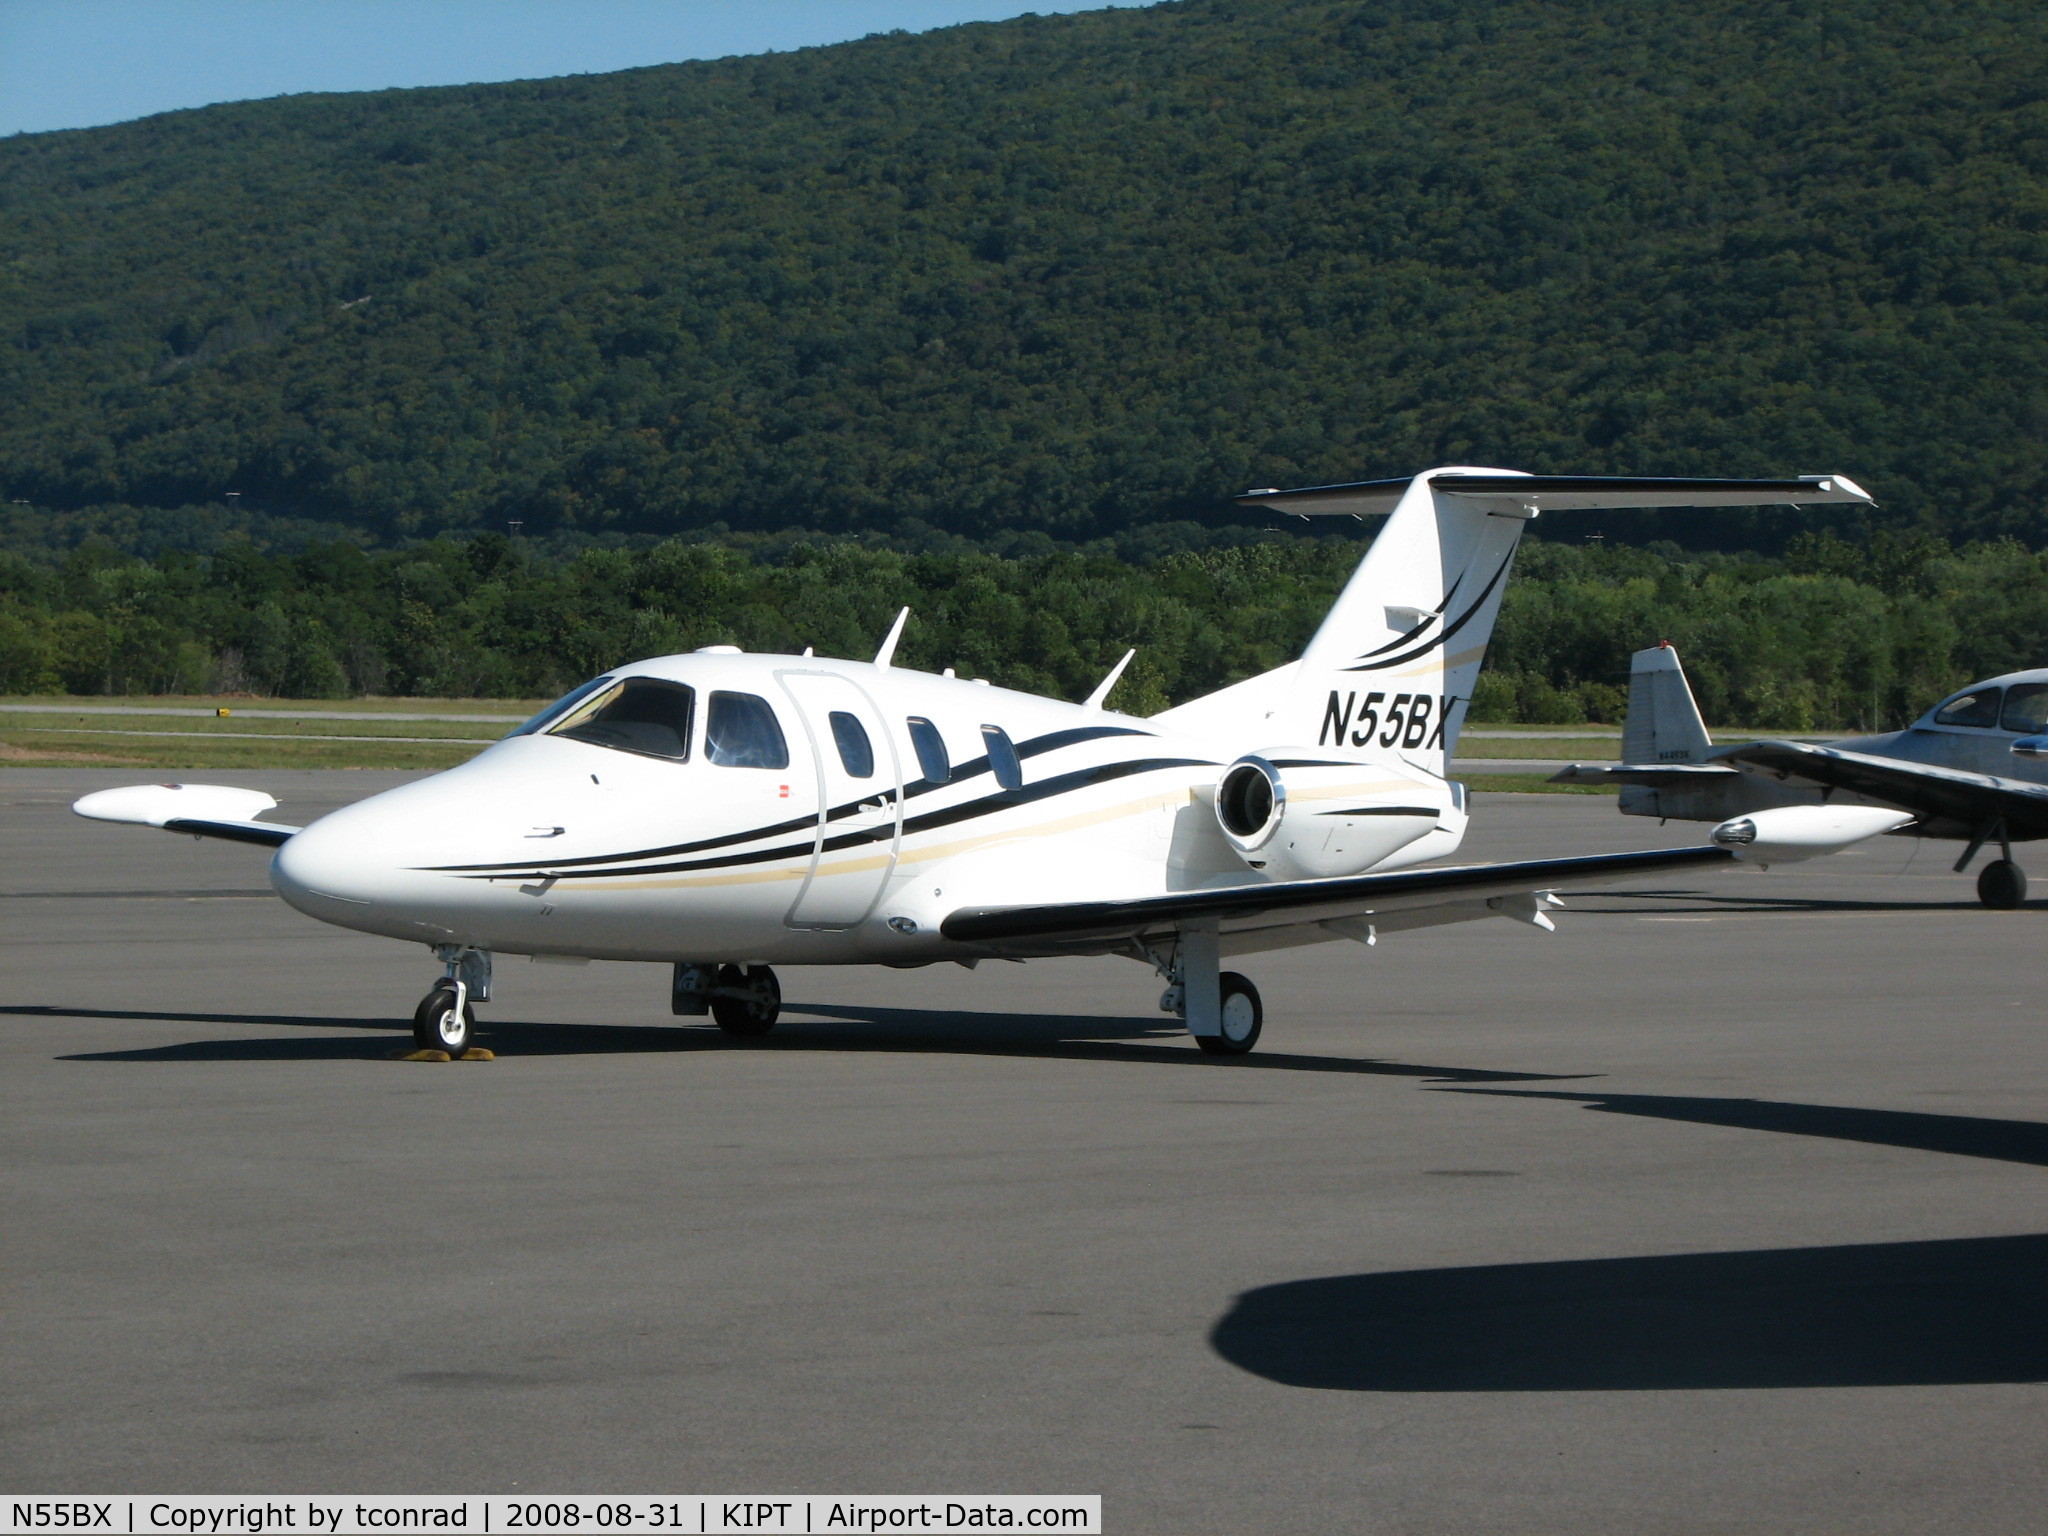 N55BX, 2007 Eclipse Aviation Corp EA500 C/N 000029, at Williamsport